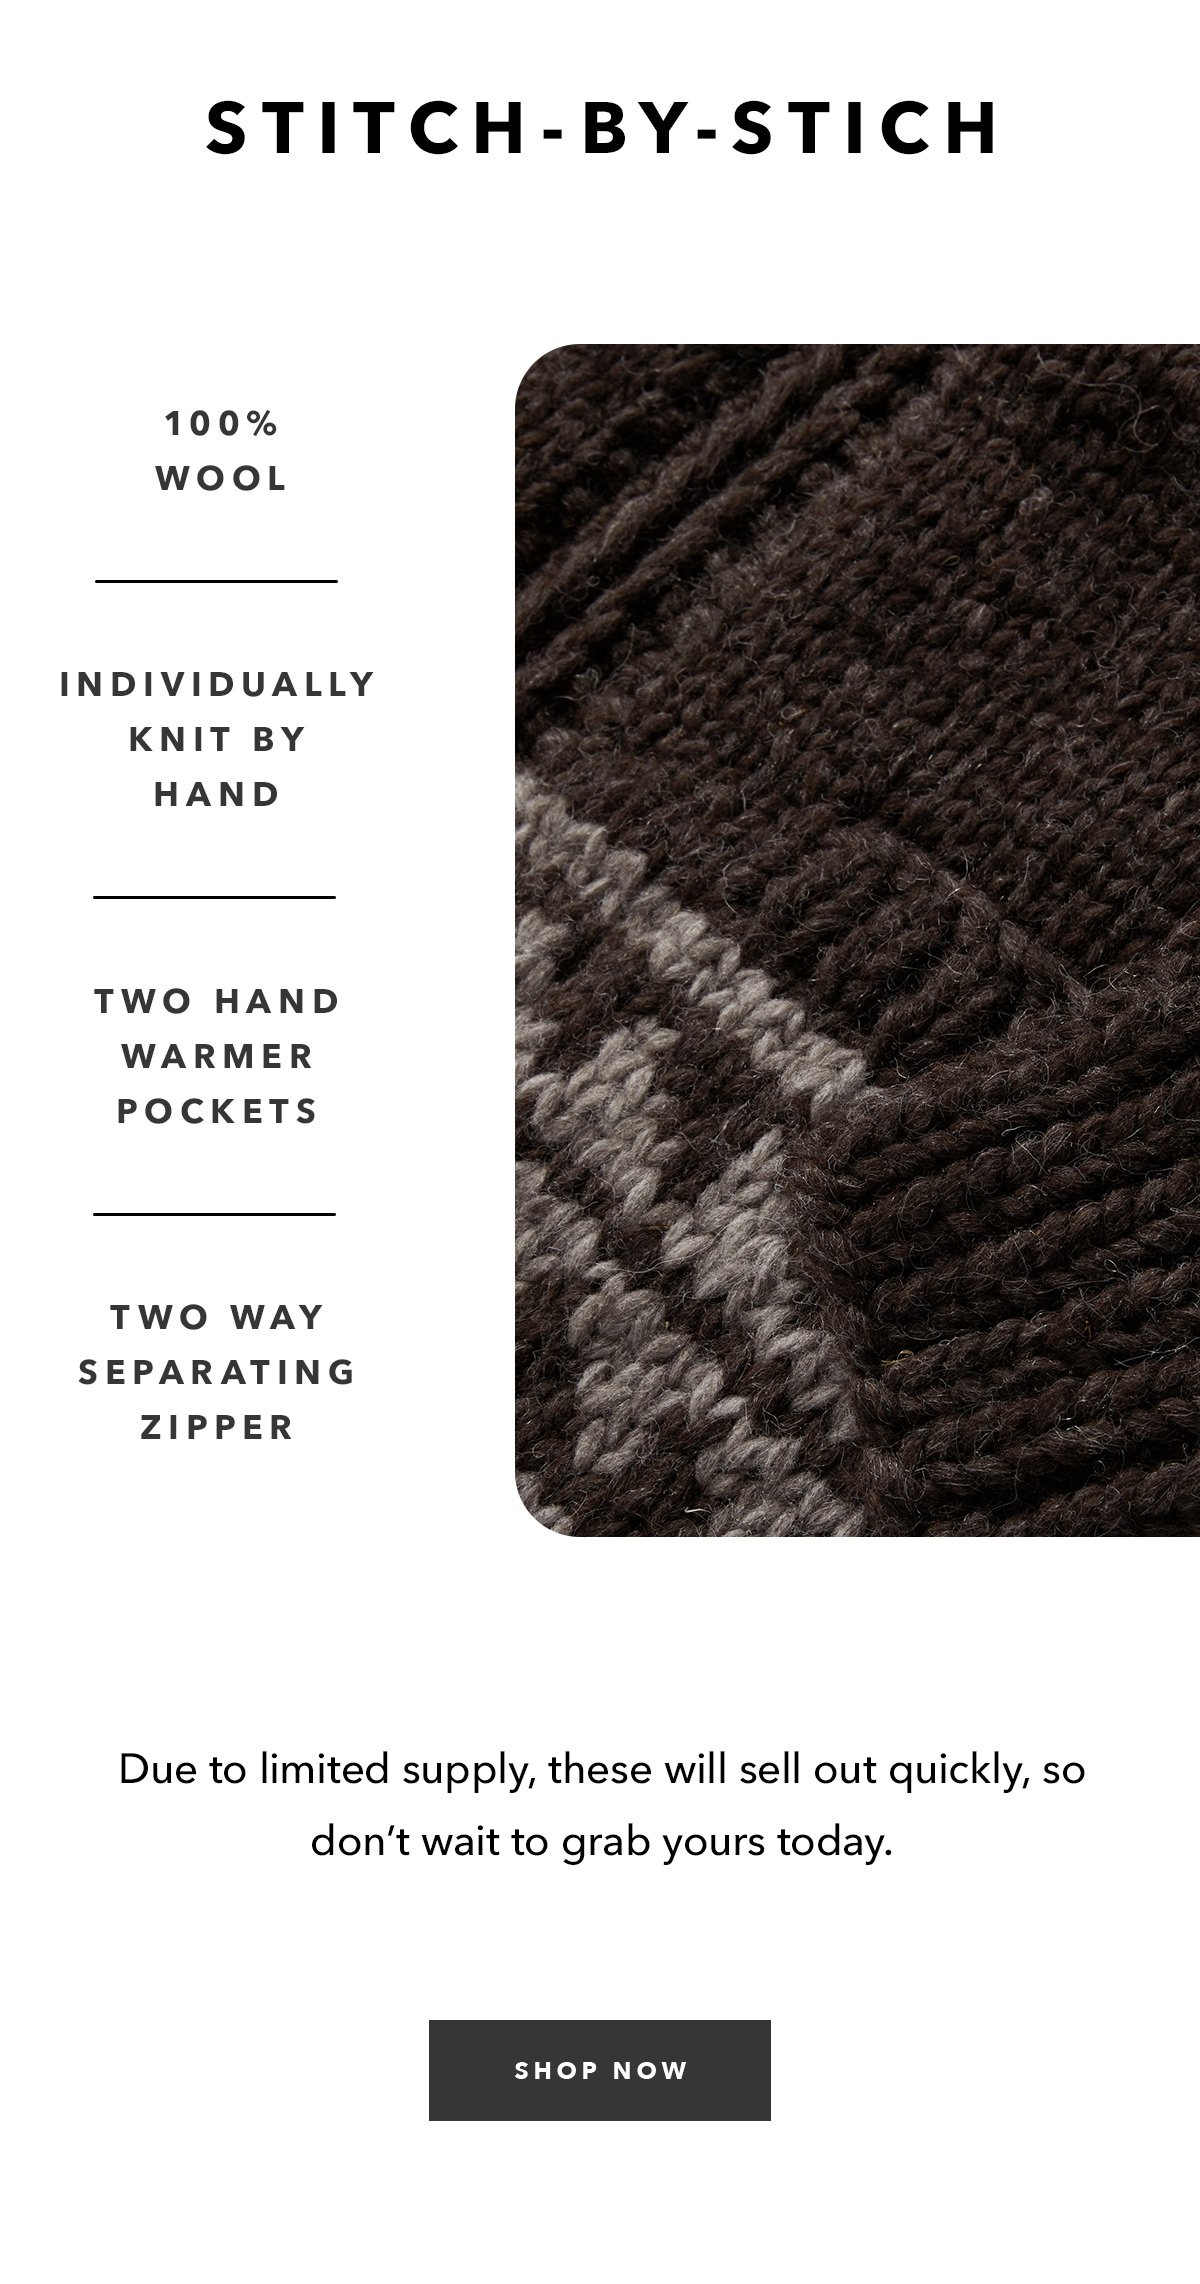 100% wool. Individually knit by hand. Two hand warmer pockets. YKK two way separating zipper.